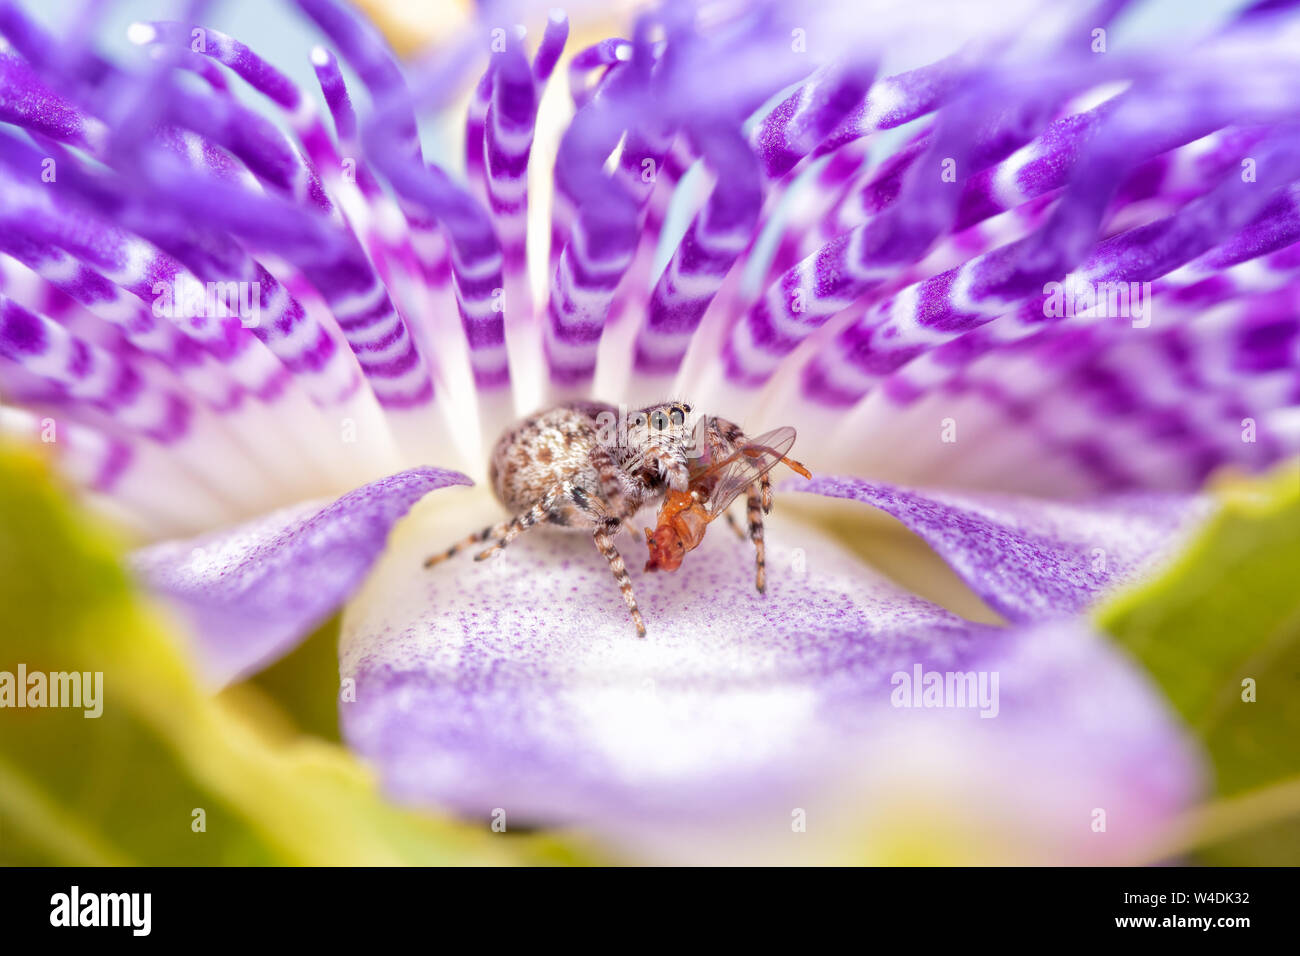 Beautiful female Peppered Jumper holding a fly, having lunch in a beautiful, quiet spot inside a Passionvine flower Stock Photo